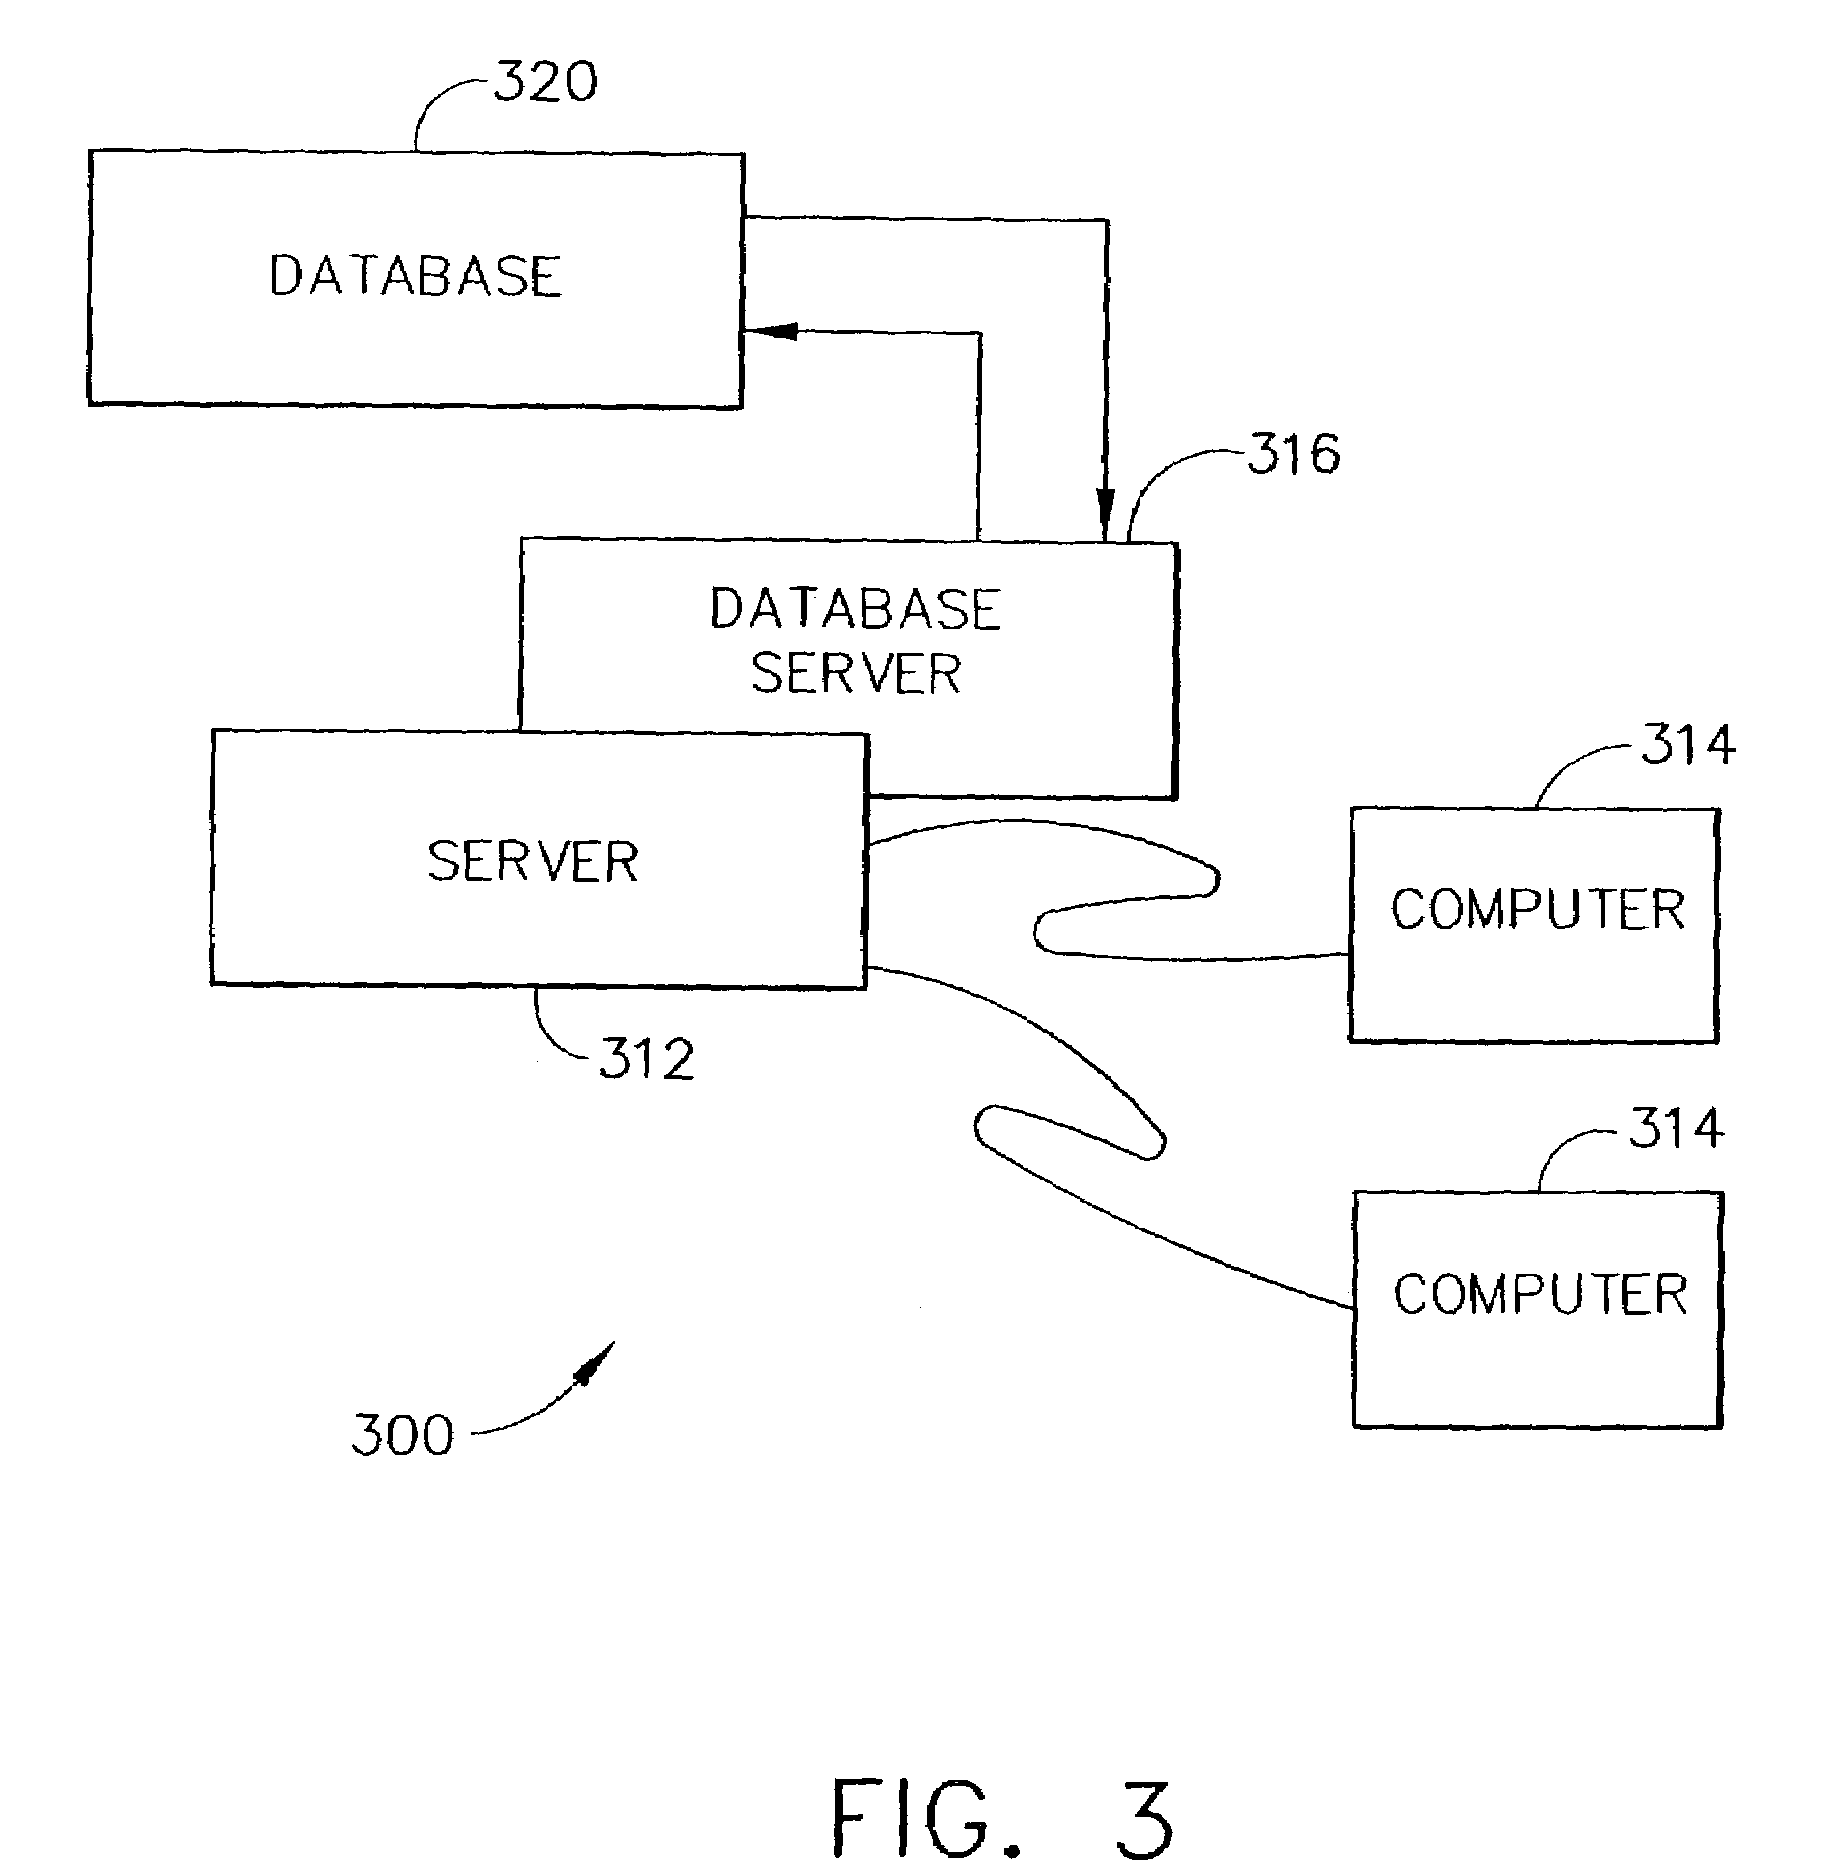 Methods and apparatus for operating production facilities